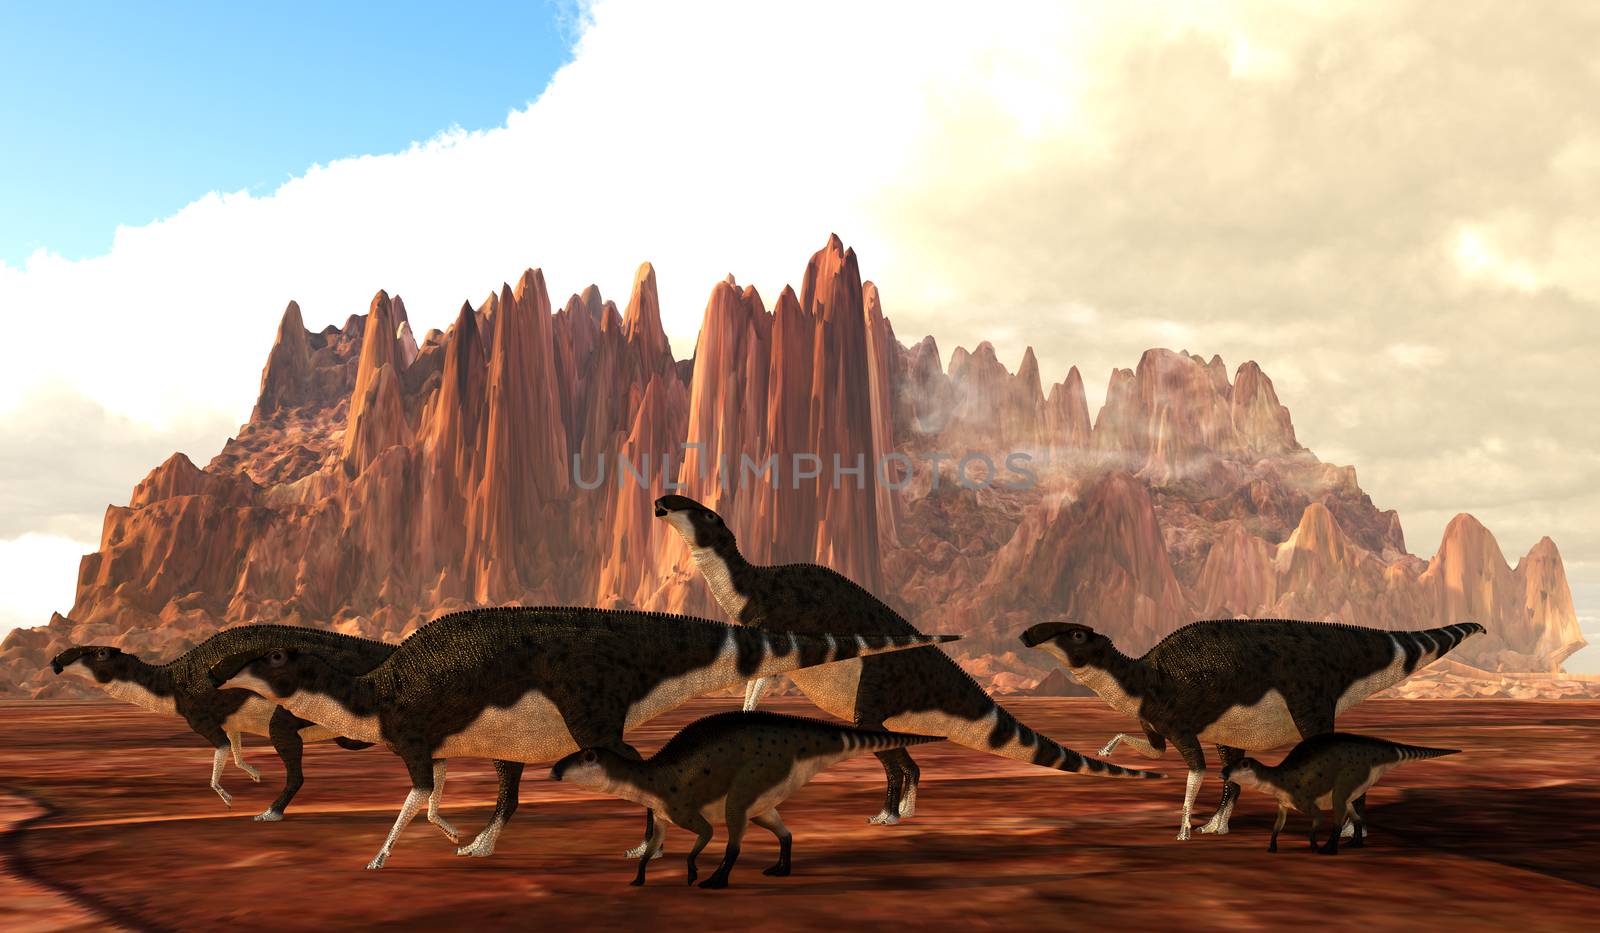 A herd of Brachylophosaurus dinosaurs cross a desert area during the Cretaceous Period of Canada and the United States.